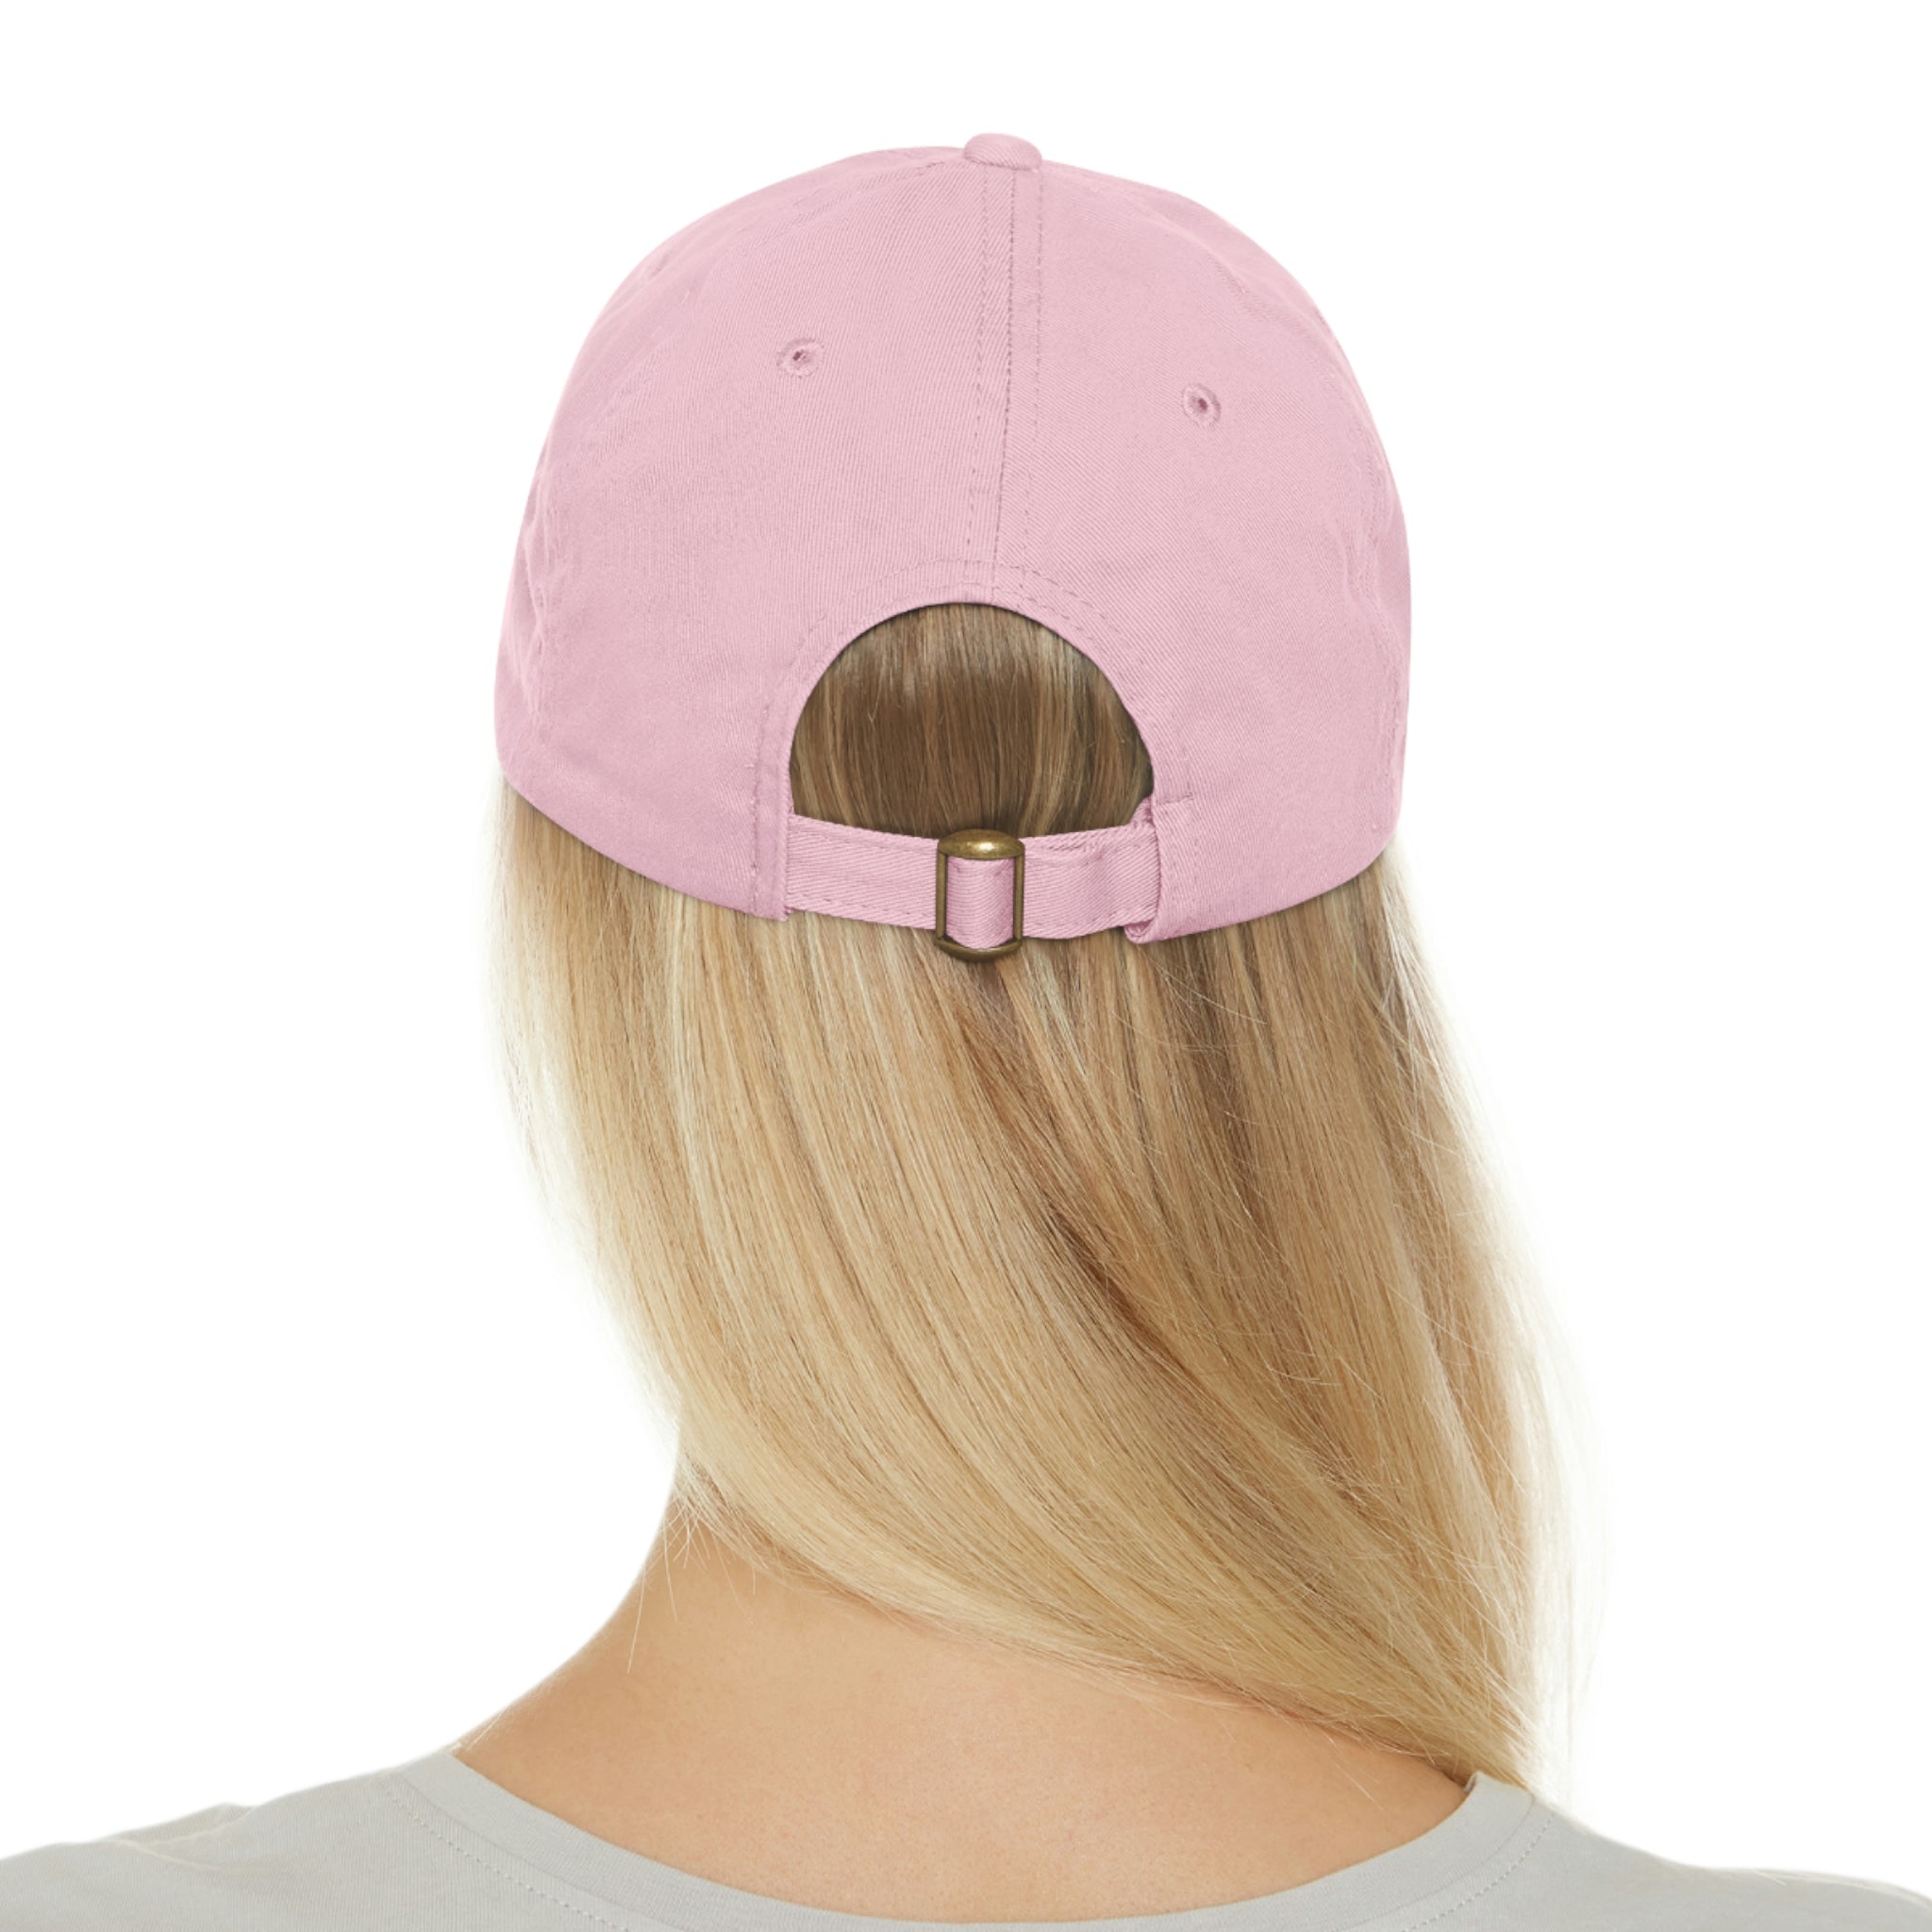 PersonalHour Hat with Leather Patch (Round) - Personal Hour for Yoga and Meditations 